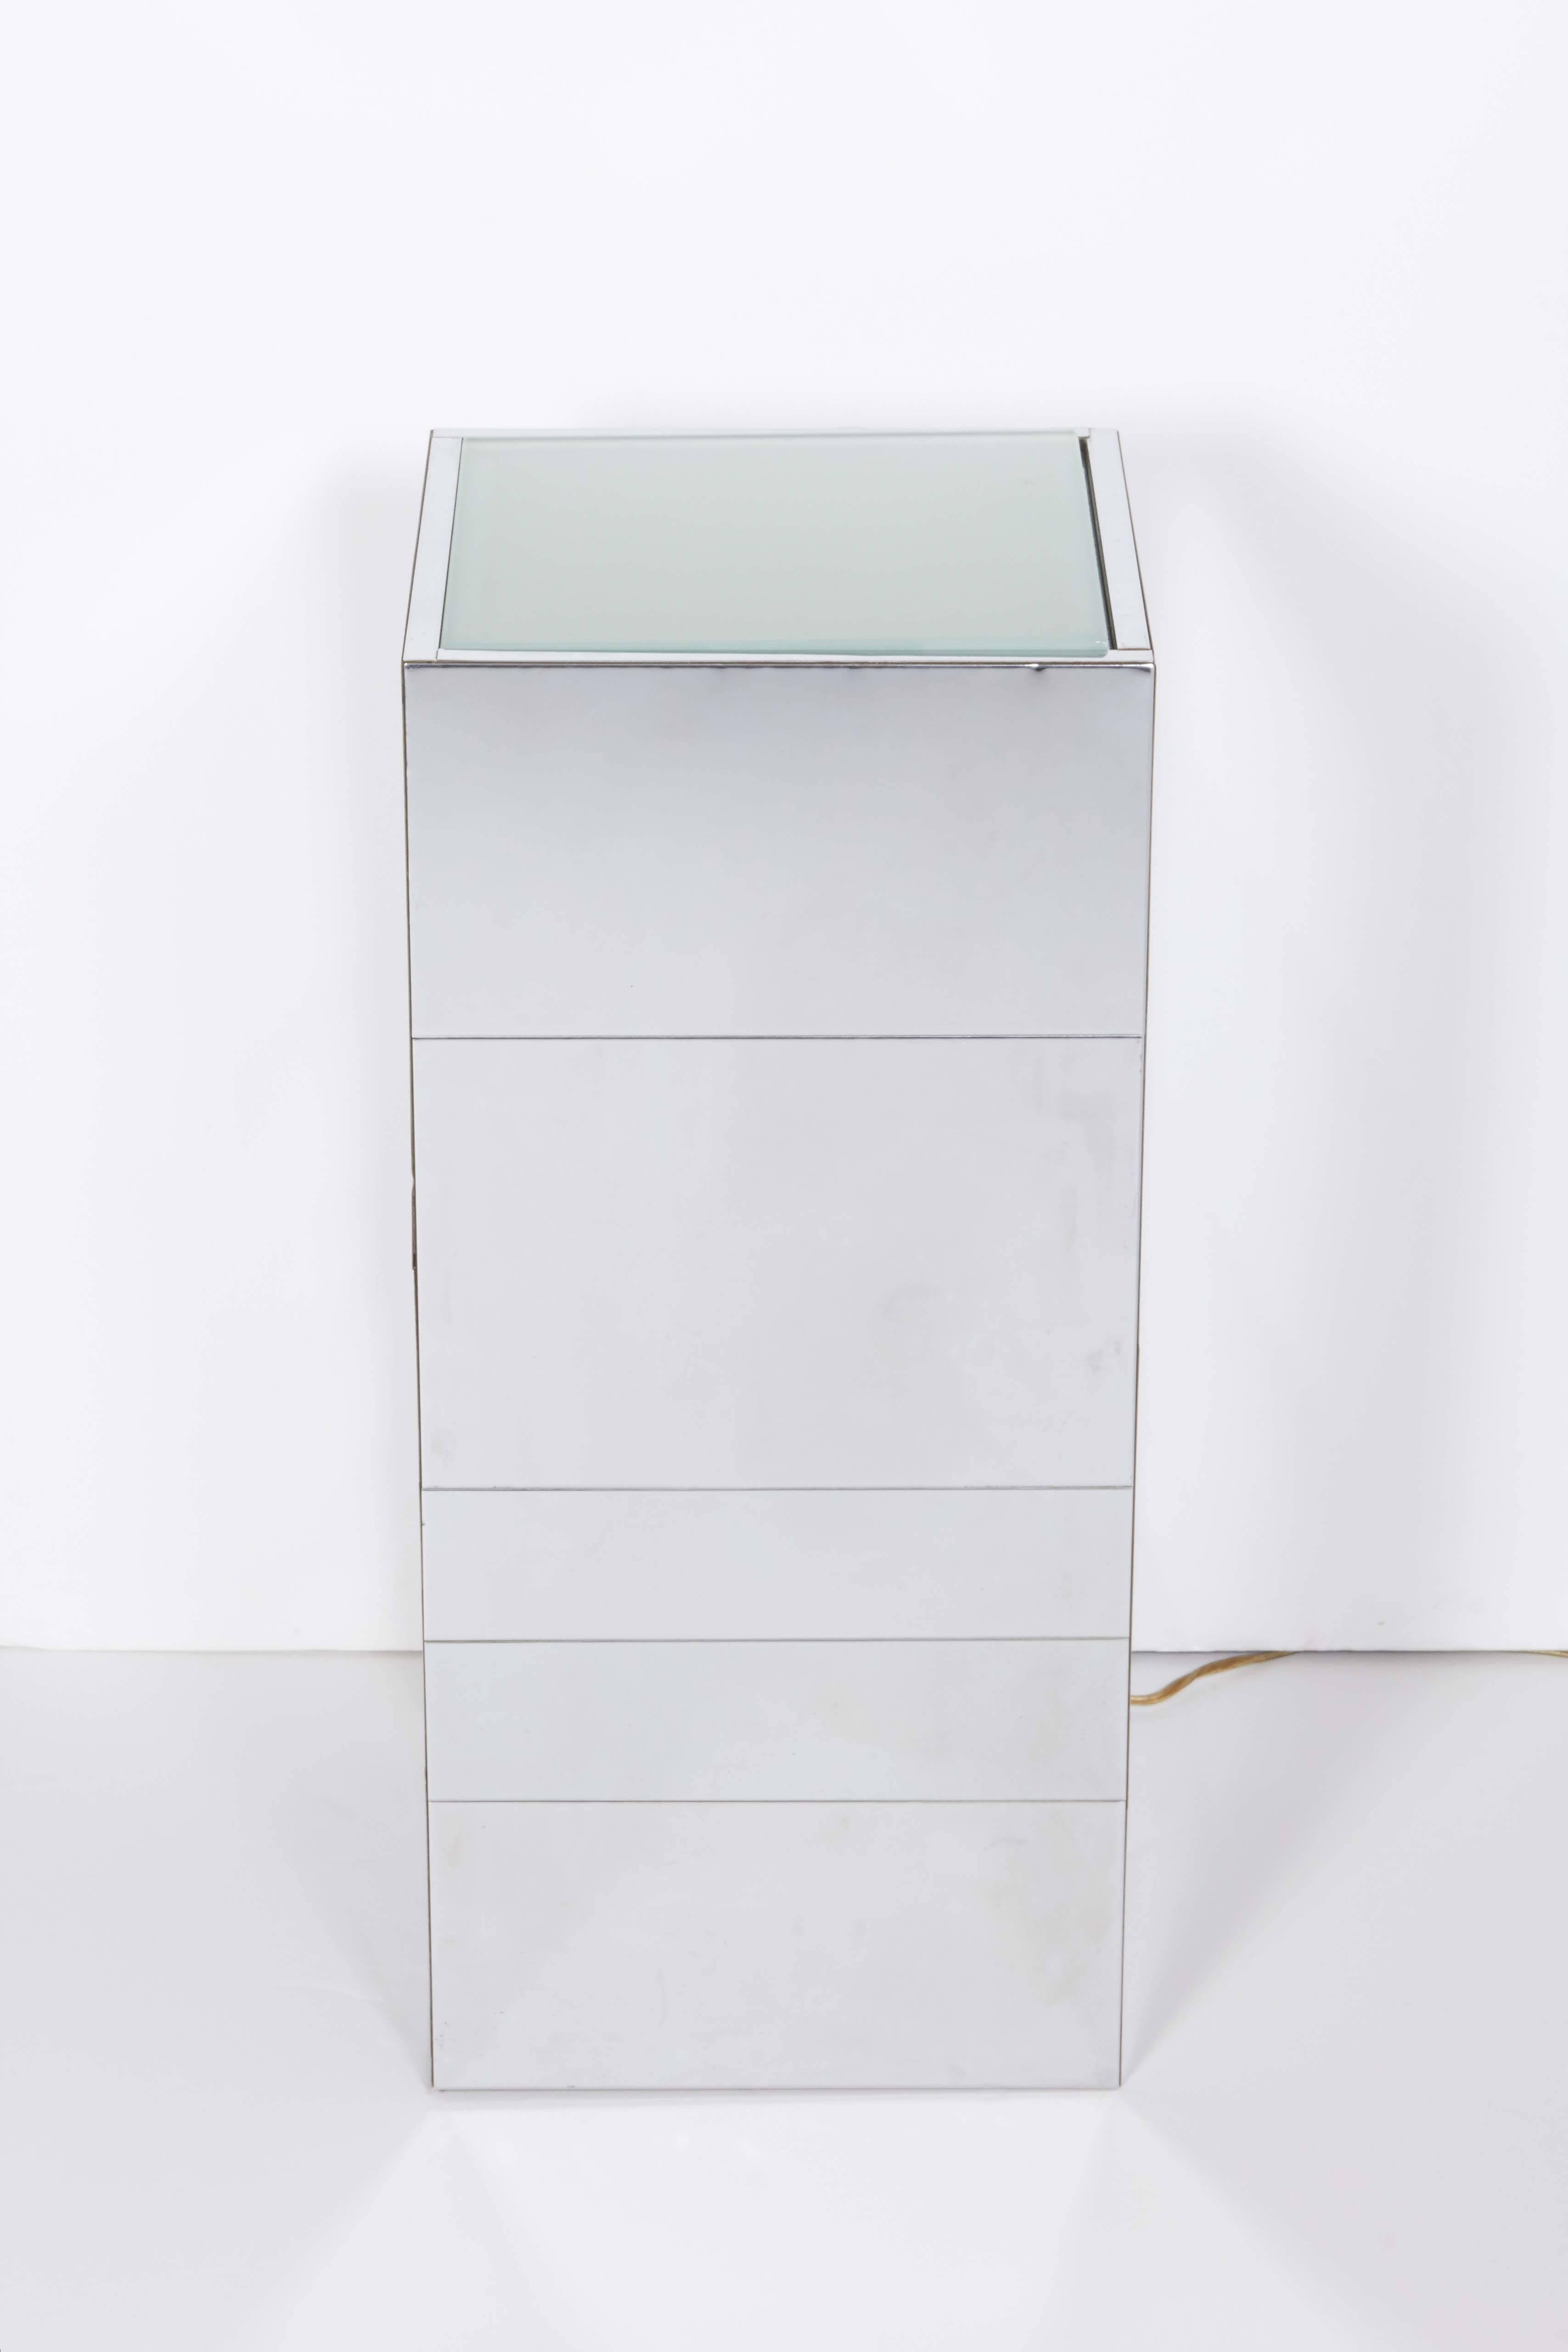 An illuminated pedestal by designer Paul Evans for Directional, manufactured circa 1970s, with frosted glass top, against linear form in chrome. Includes ceramic socket, requiring Edison base bulb (up to 40 watt). The pedestal remain in very good